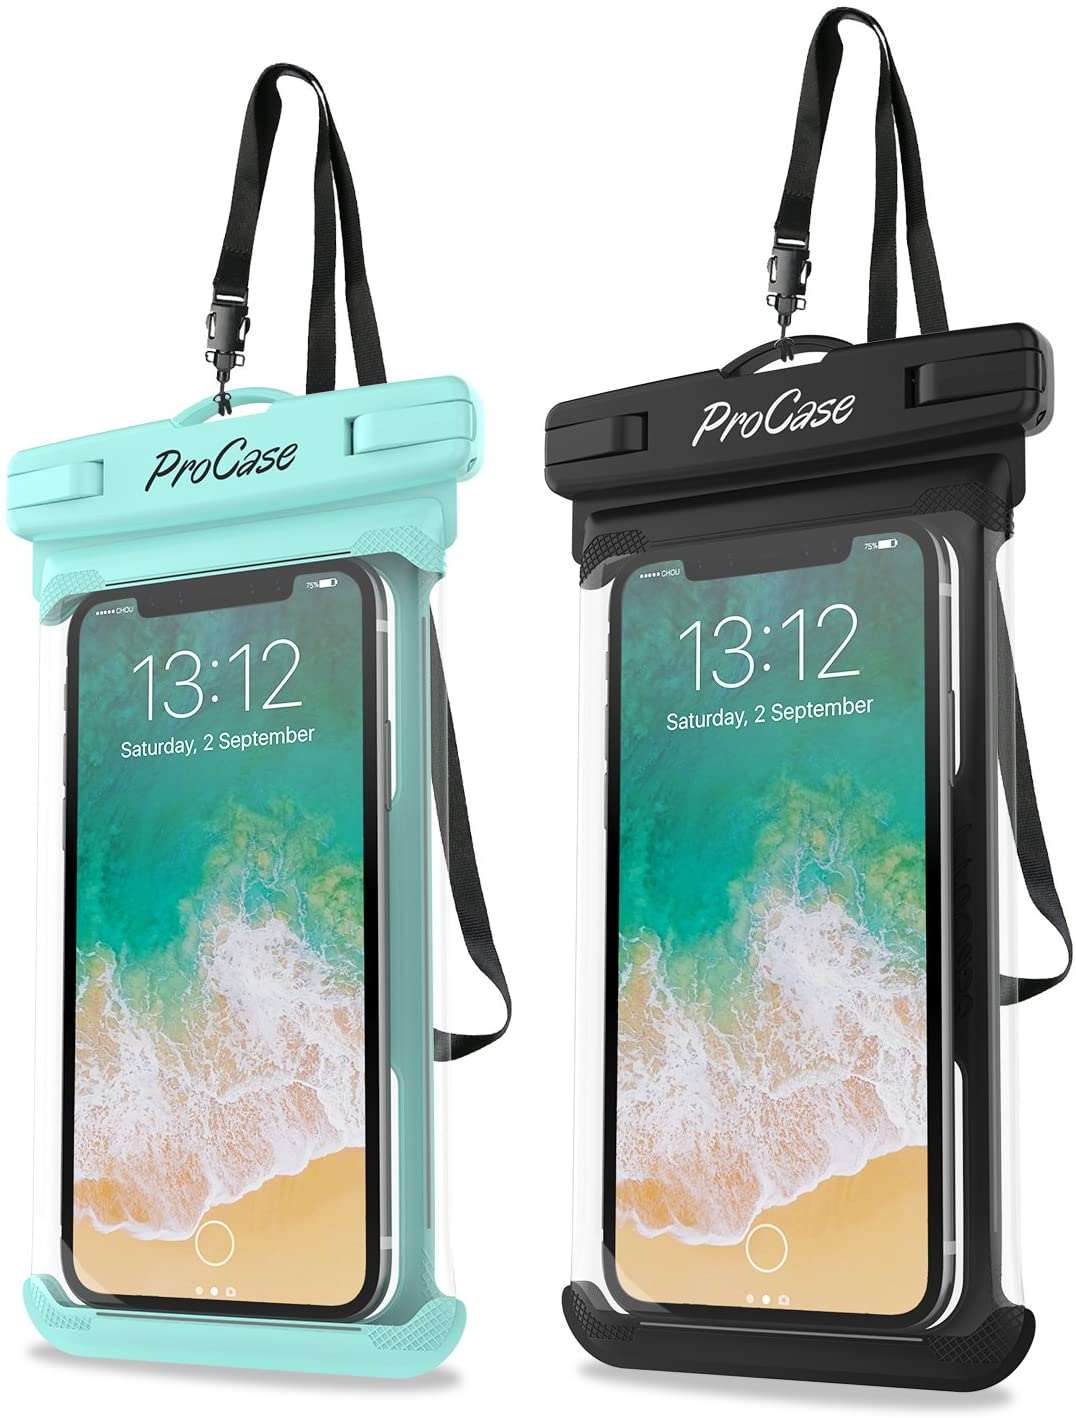 Universal Waterproof Pouch Phone Dry Bag - 2 Pack | ProCase green+black